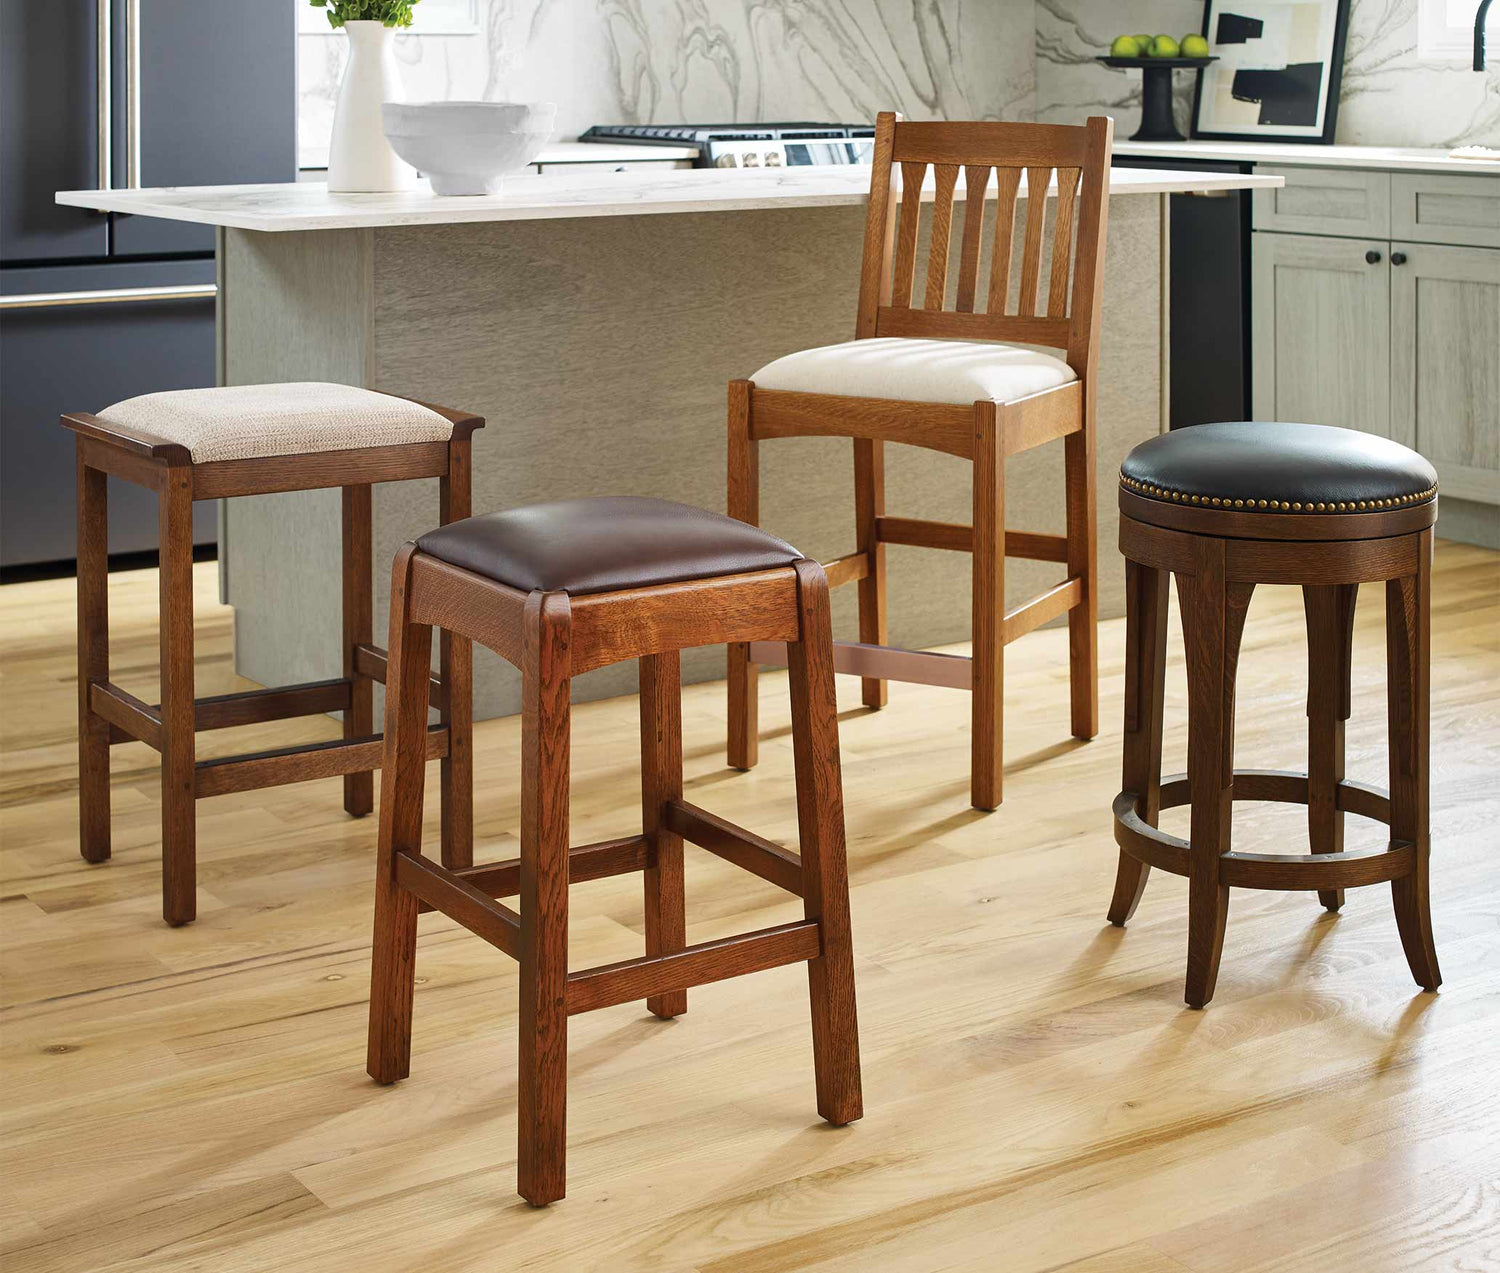 Four assorted stools that can be used with Stickley Gathering Islands